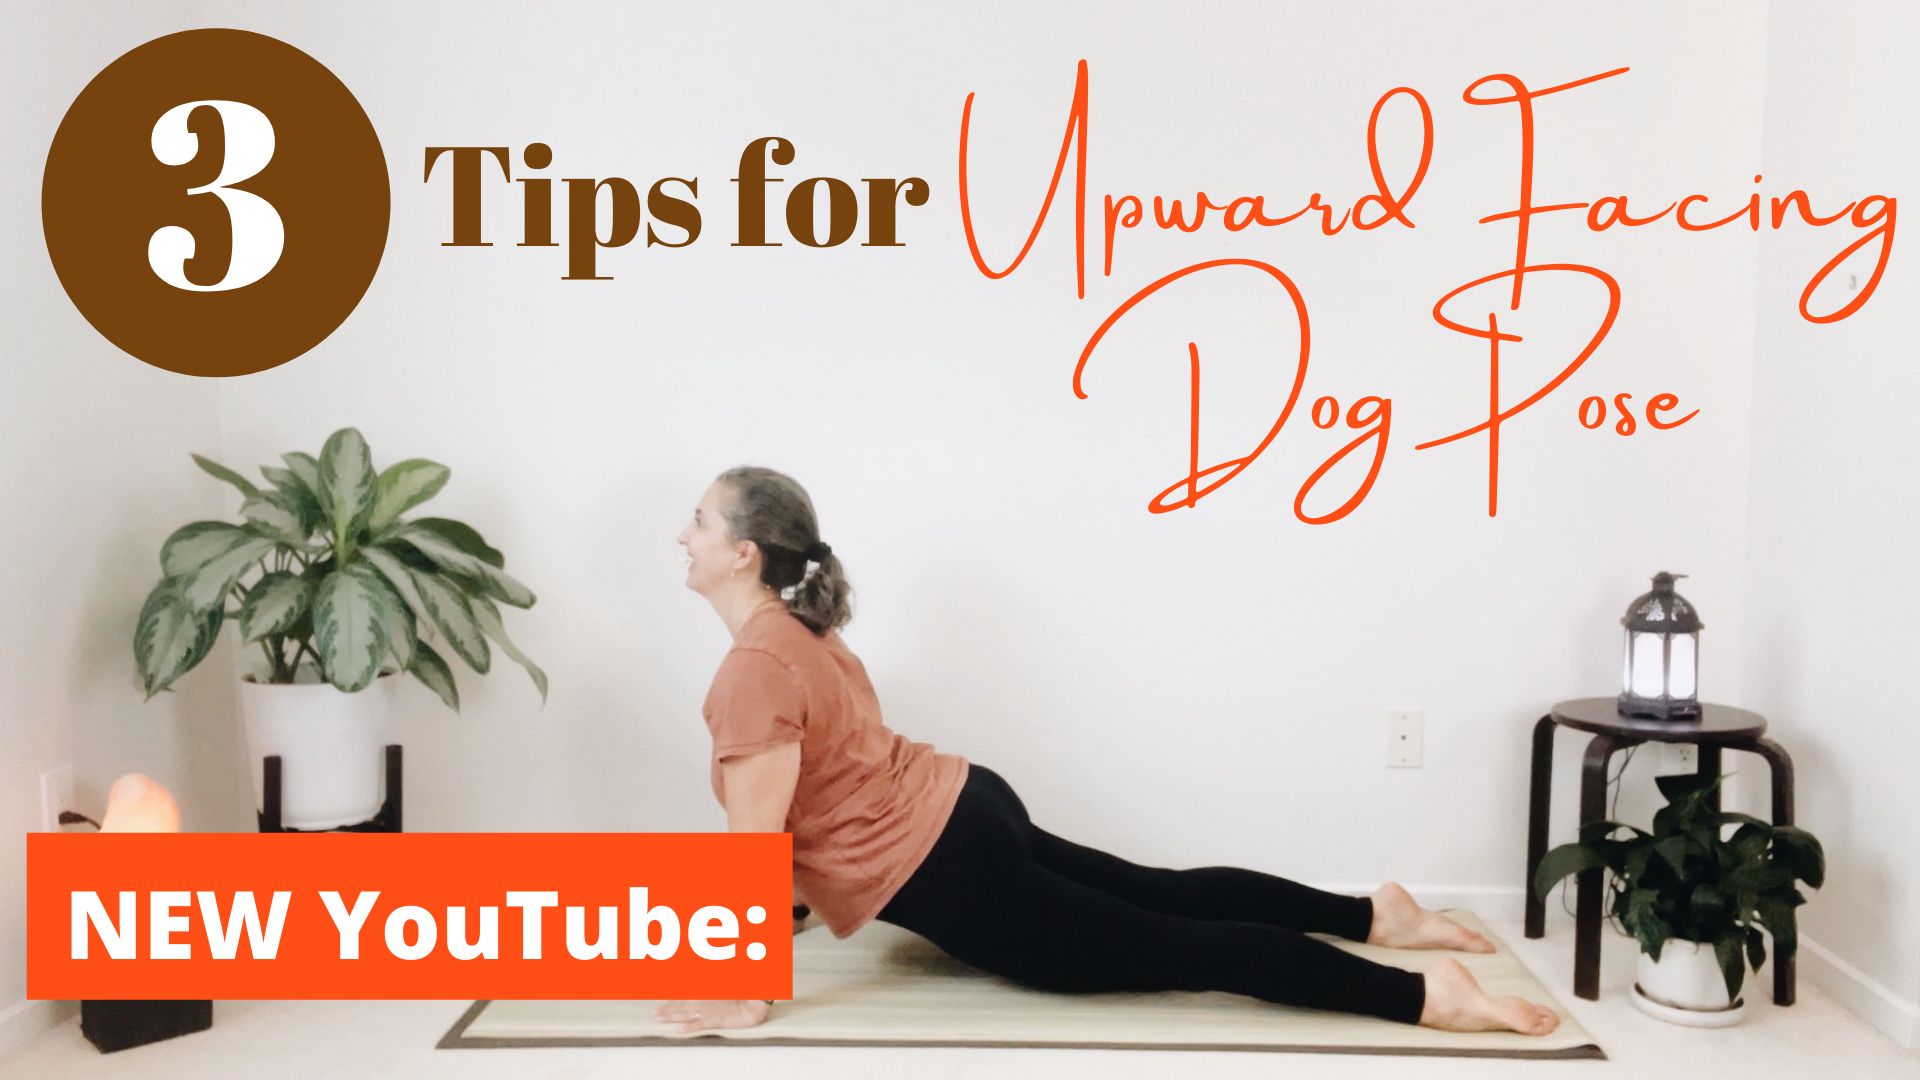 YouTube: 3 Tips to Align Updog | Yoga with Laura